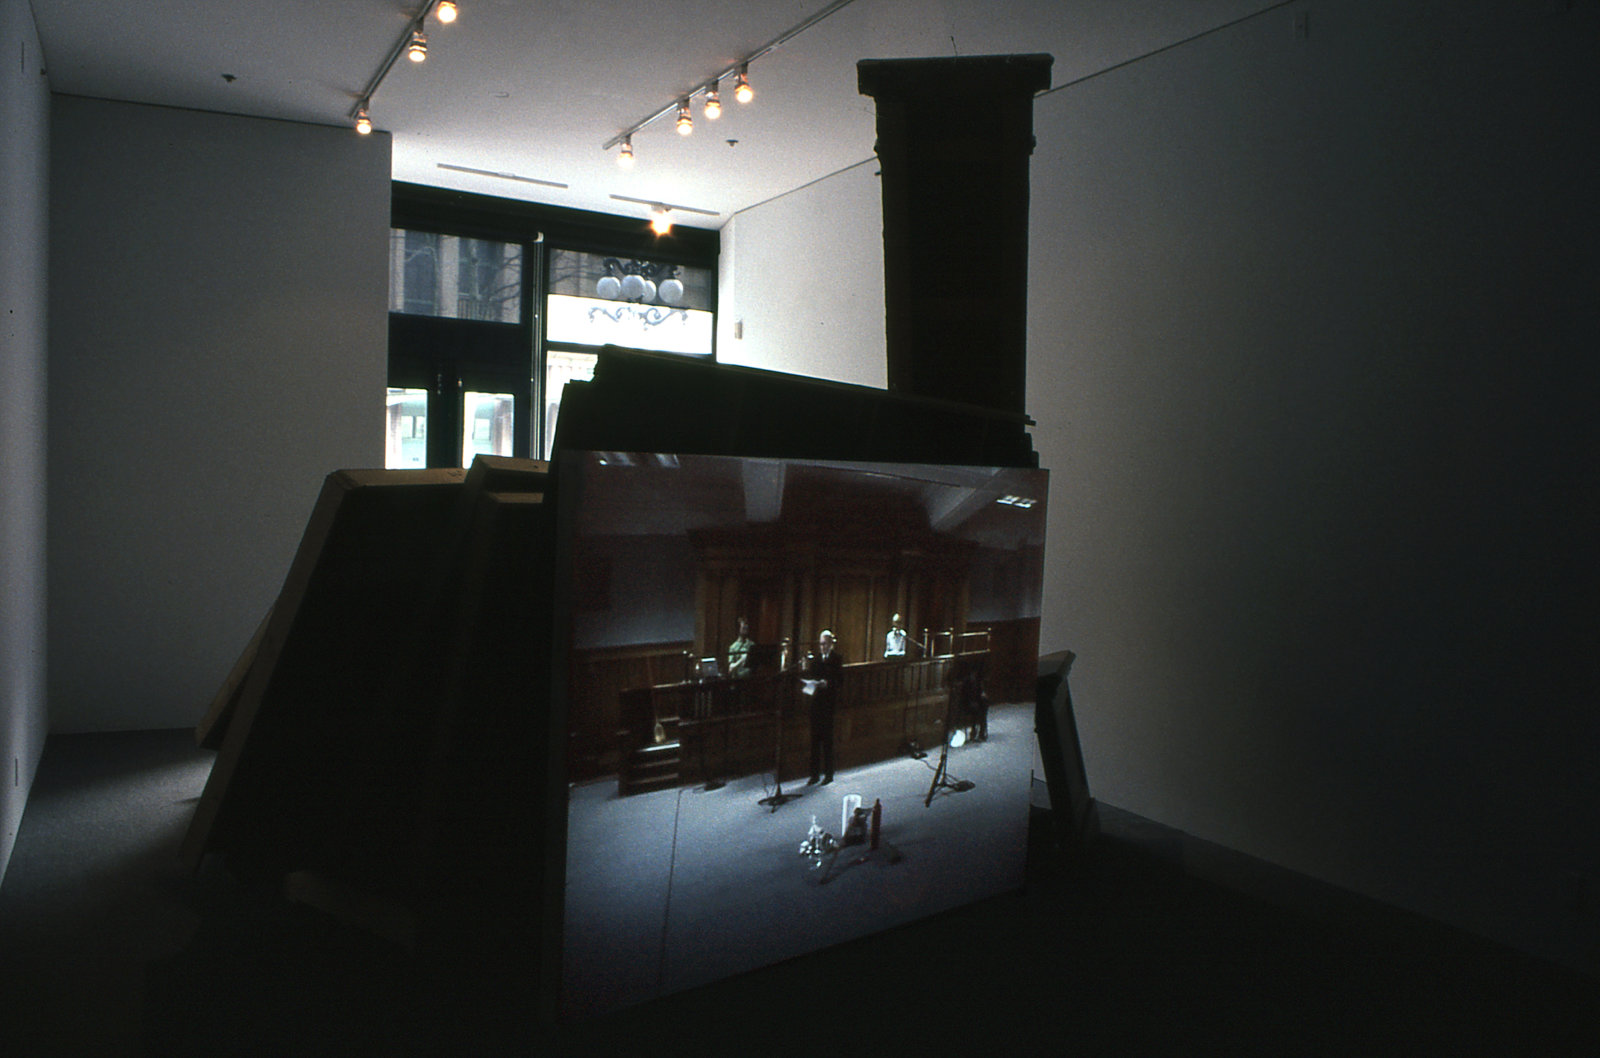 Geoffrey Farmer and Judy Radul, Room 302, 2005, courtroom furnishings and DVD projection, dimensions variable